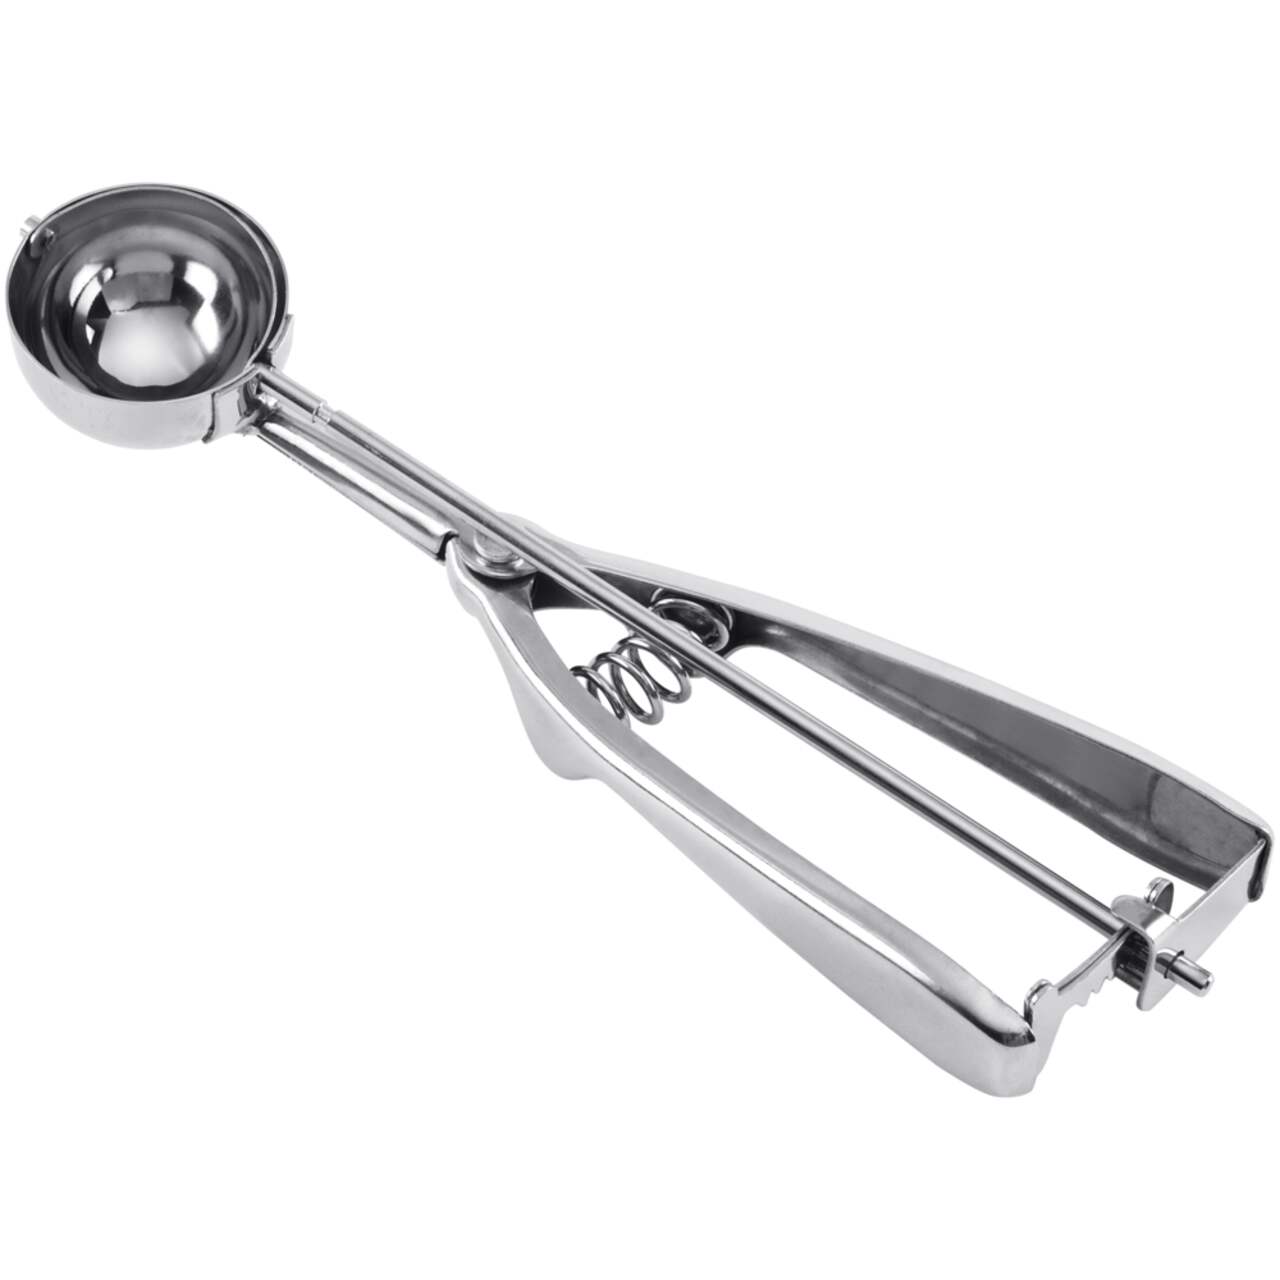 https://media-www.canadiantire.ca/product/living/kitchen/kitchen-tools-thermometers/1424363/wilton-mechanical-cookie-scoop-76195b41-c7ad-407b-a416-0b54fe711f3e.png?imdensity=1&imwidth=640&impolicy=mZoom